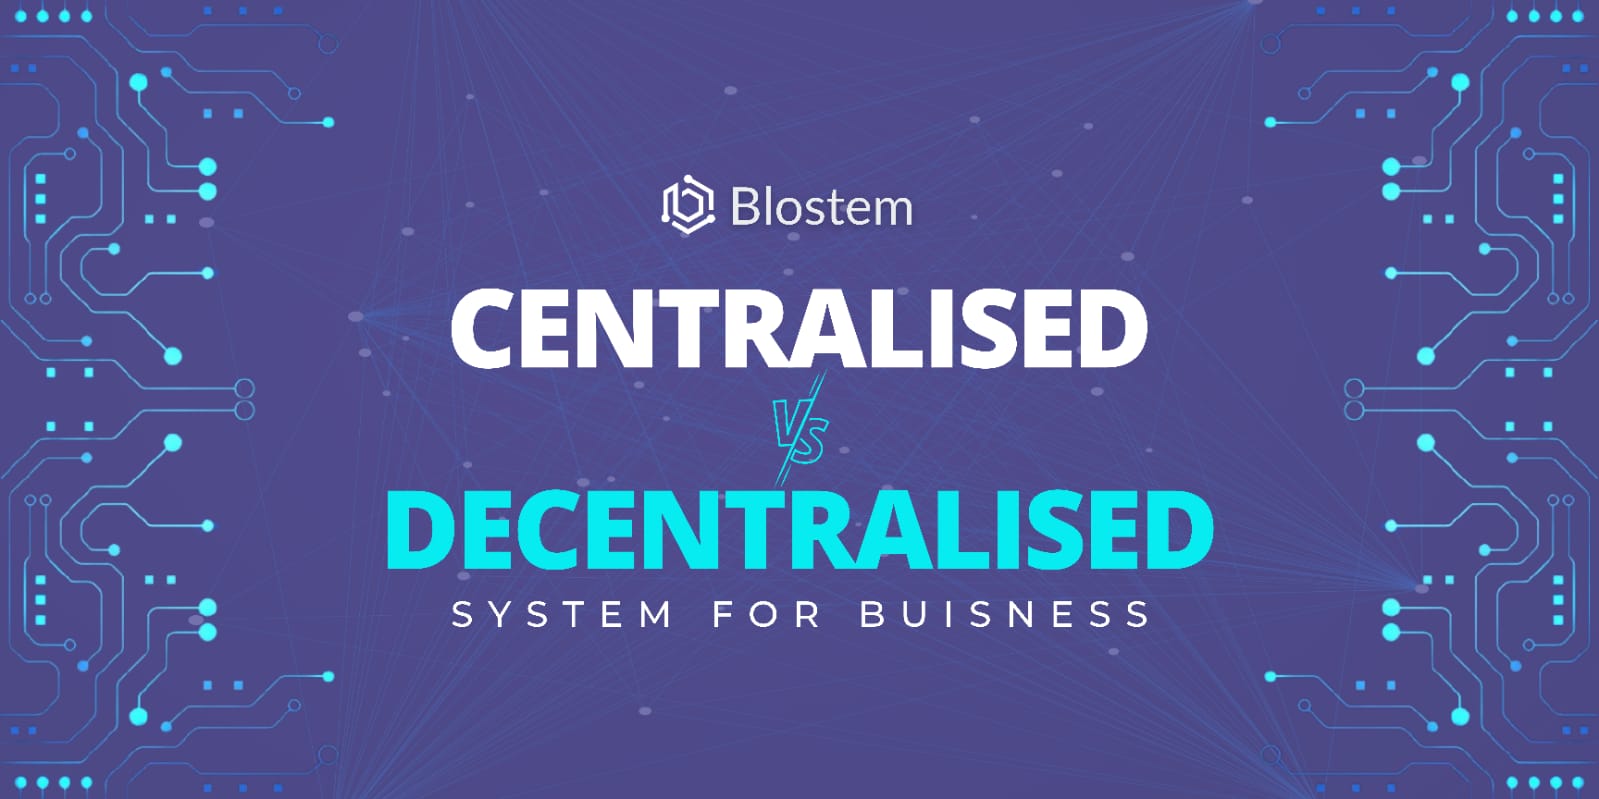 Centralized vs. Decentralized system for business